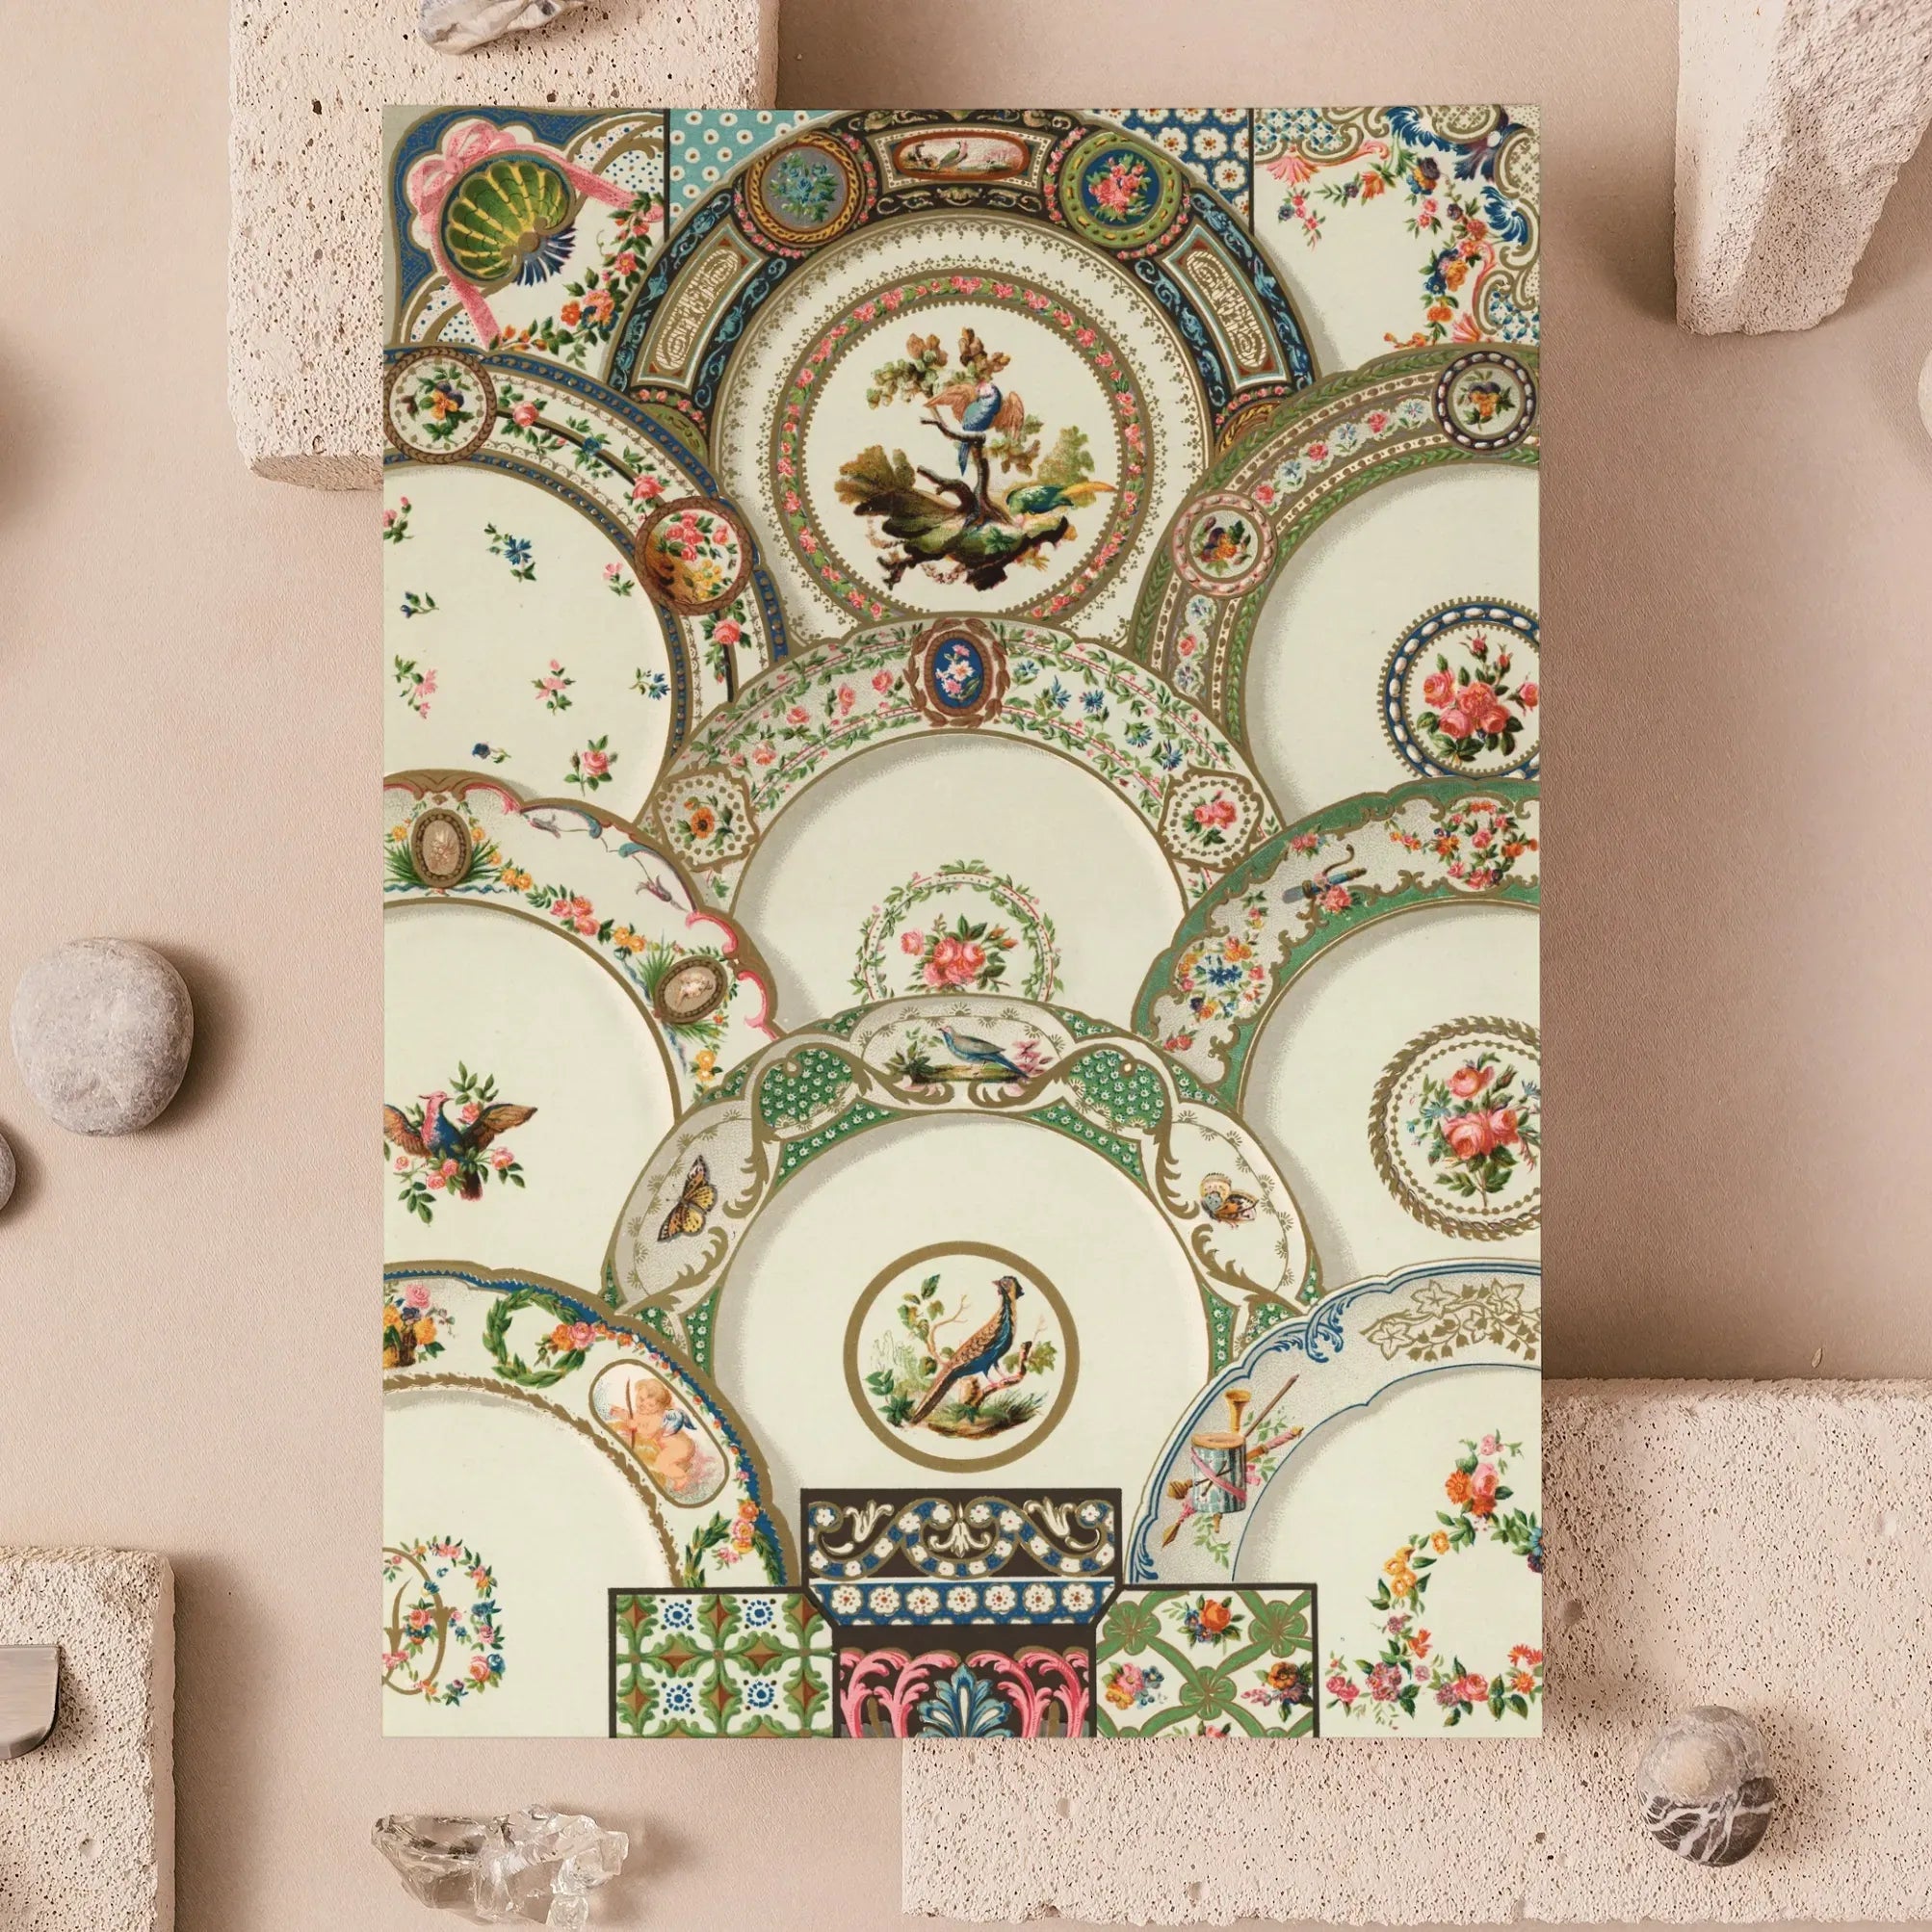 Decorative Plates - Auguste Racinet Art Greeting Card - Greeting & Note Cards - Aesthetic Art